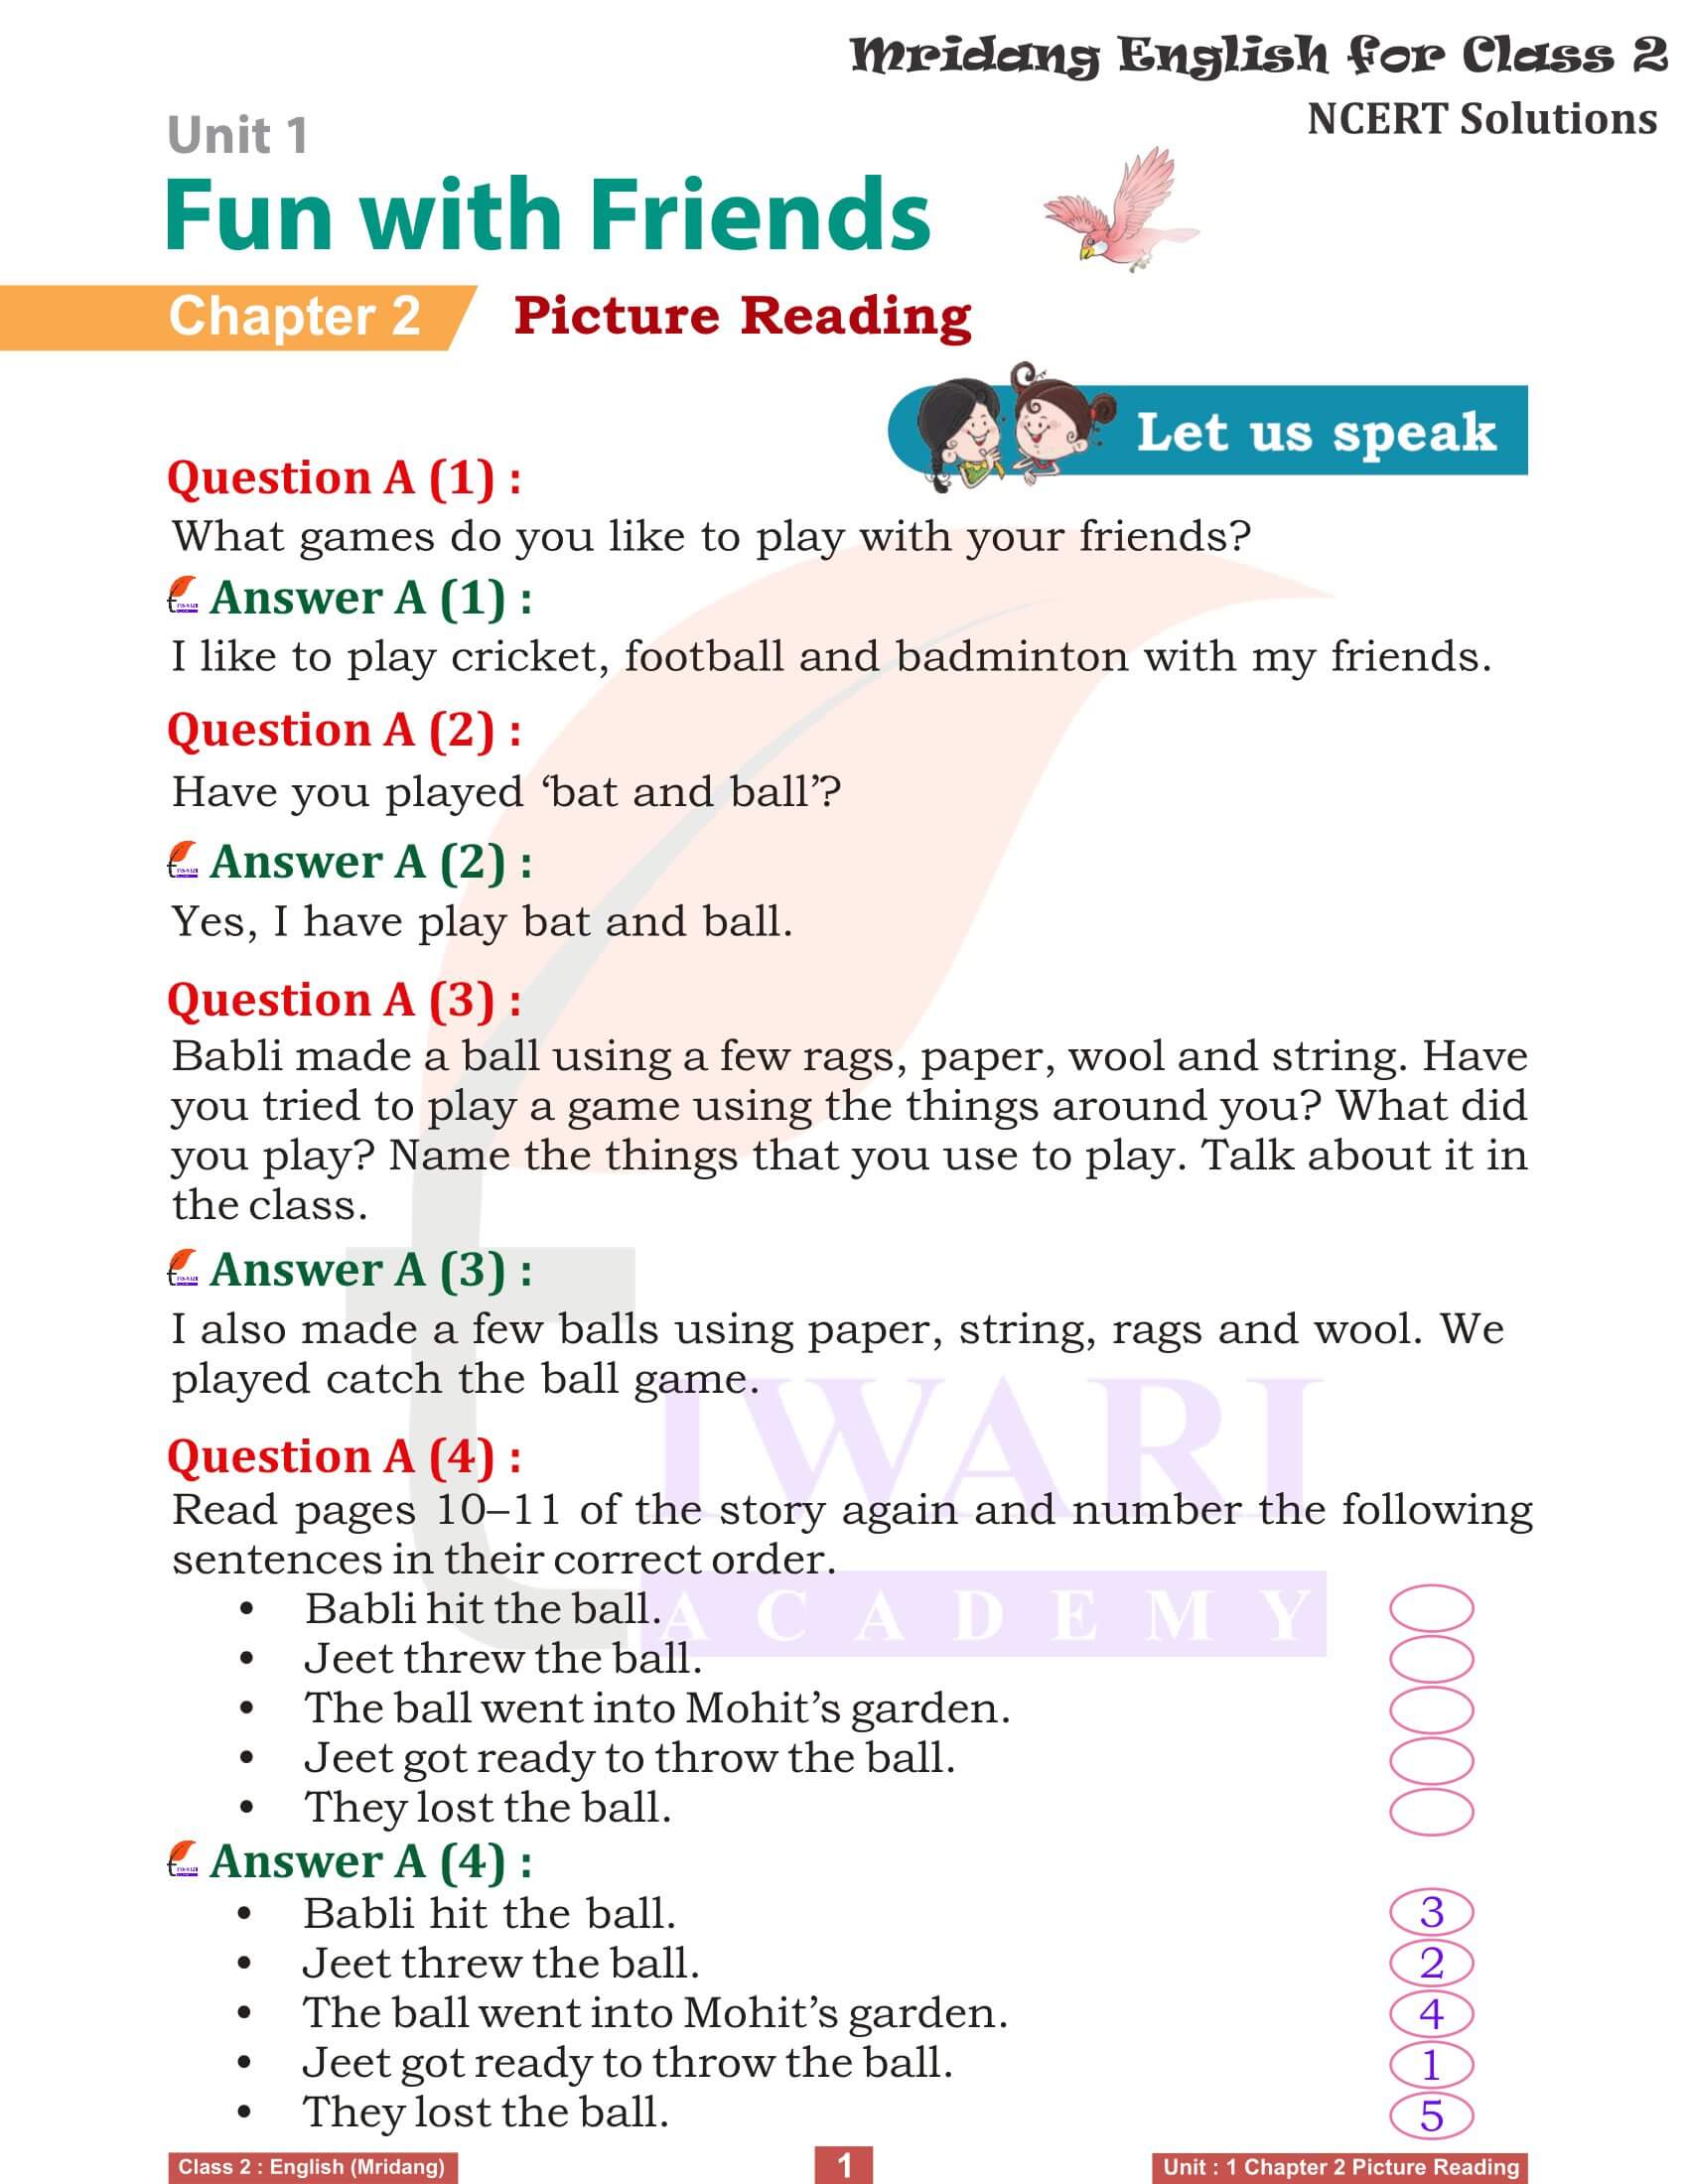 NCERT Solutions for Class 2 English Mridang Unit 1 Fun with Friends Chapter 2 Picture Reading